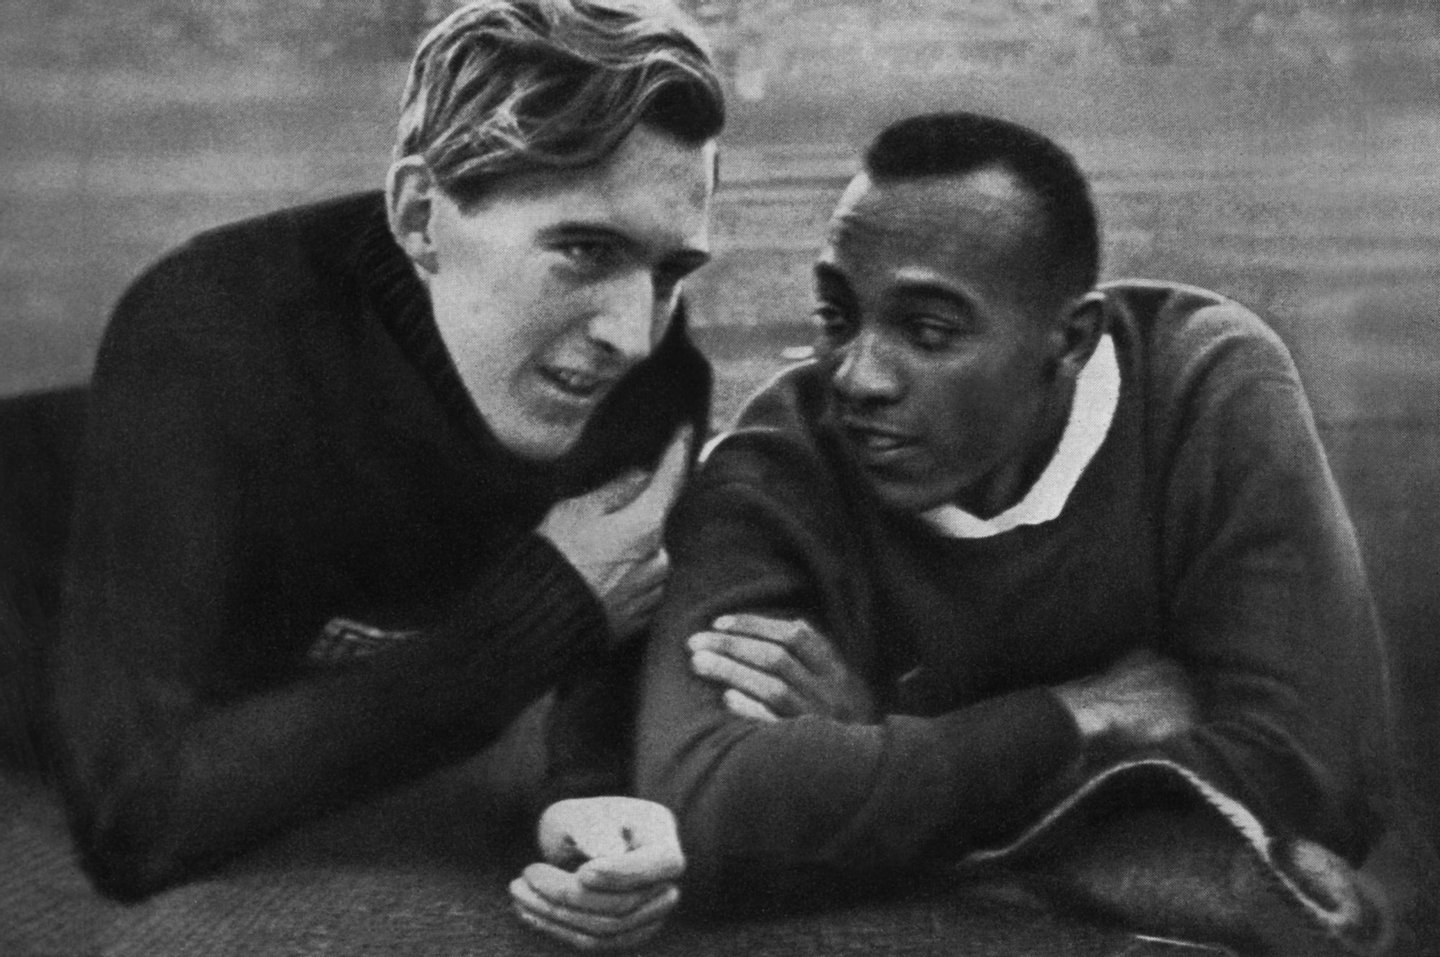 US champion Jesse Owens (R) and German champion Luz Long (L) chat together on the Berlin stadium 01 August 1936 during the Olympic Games where Owens captured 4 gold medals, 100m, 200m, 4x100m and long jump. Luz, second of Owens, captured the long jump silver. Grandson of a slave and legendary athlete, "Jesse" Owens established 6 world records in 1935. "Jesse" Owens retained his 100m world record for 20 years and his long jump world record for 25 years (until 1960). (Photo credit should read CORR/AFP/Getty Images)